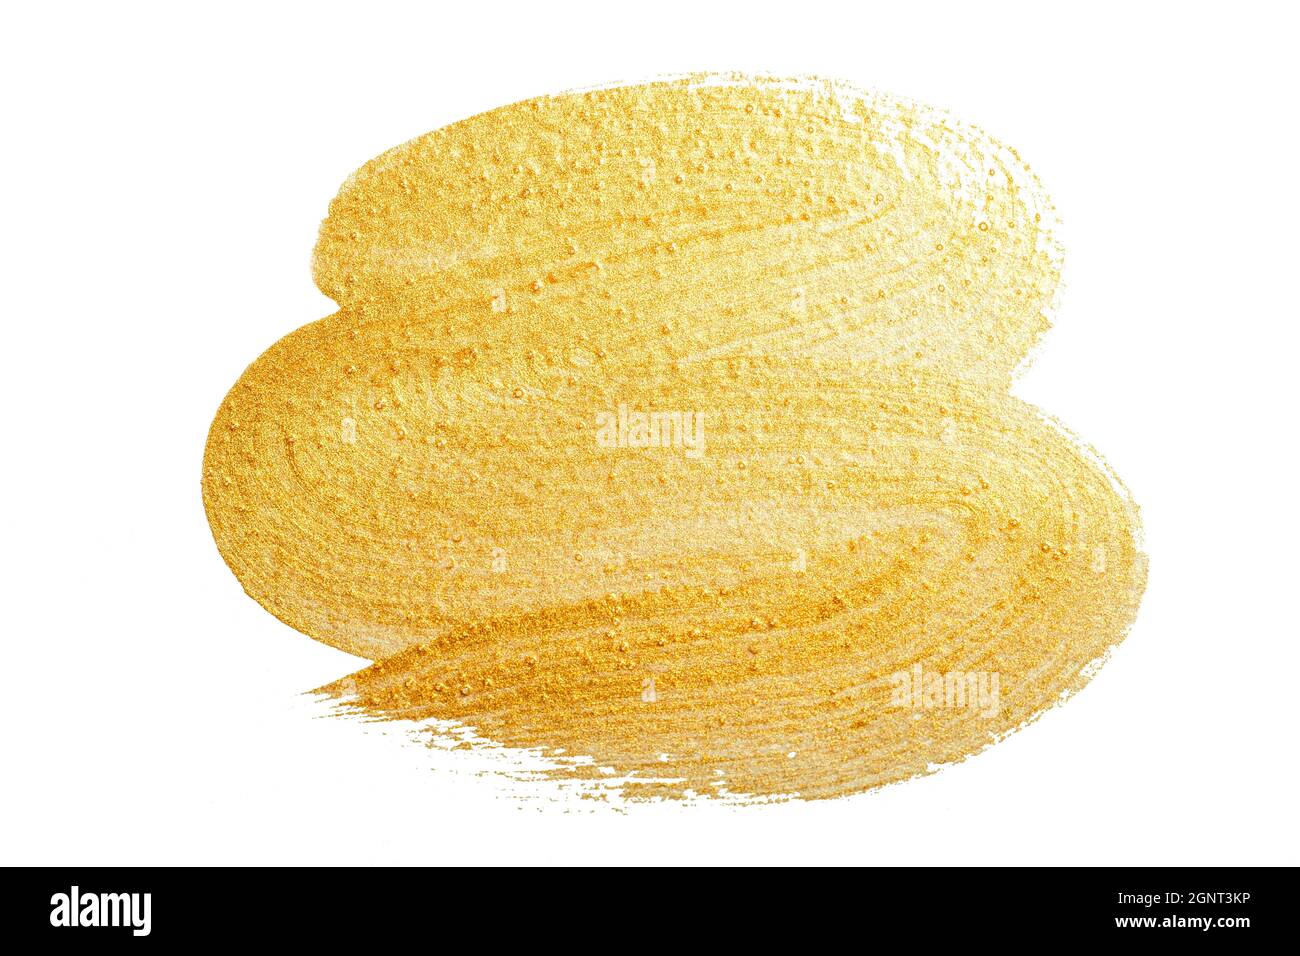 Brush of gold paint on a white background. Gold paint texture isolate. High quality photo Stock Photo